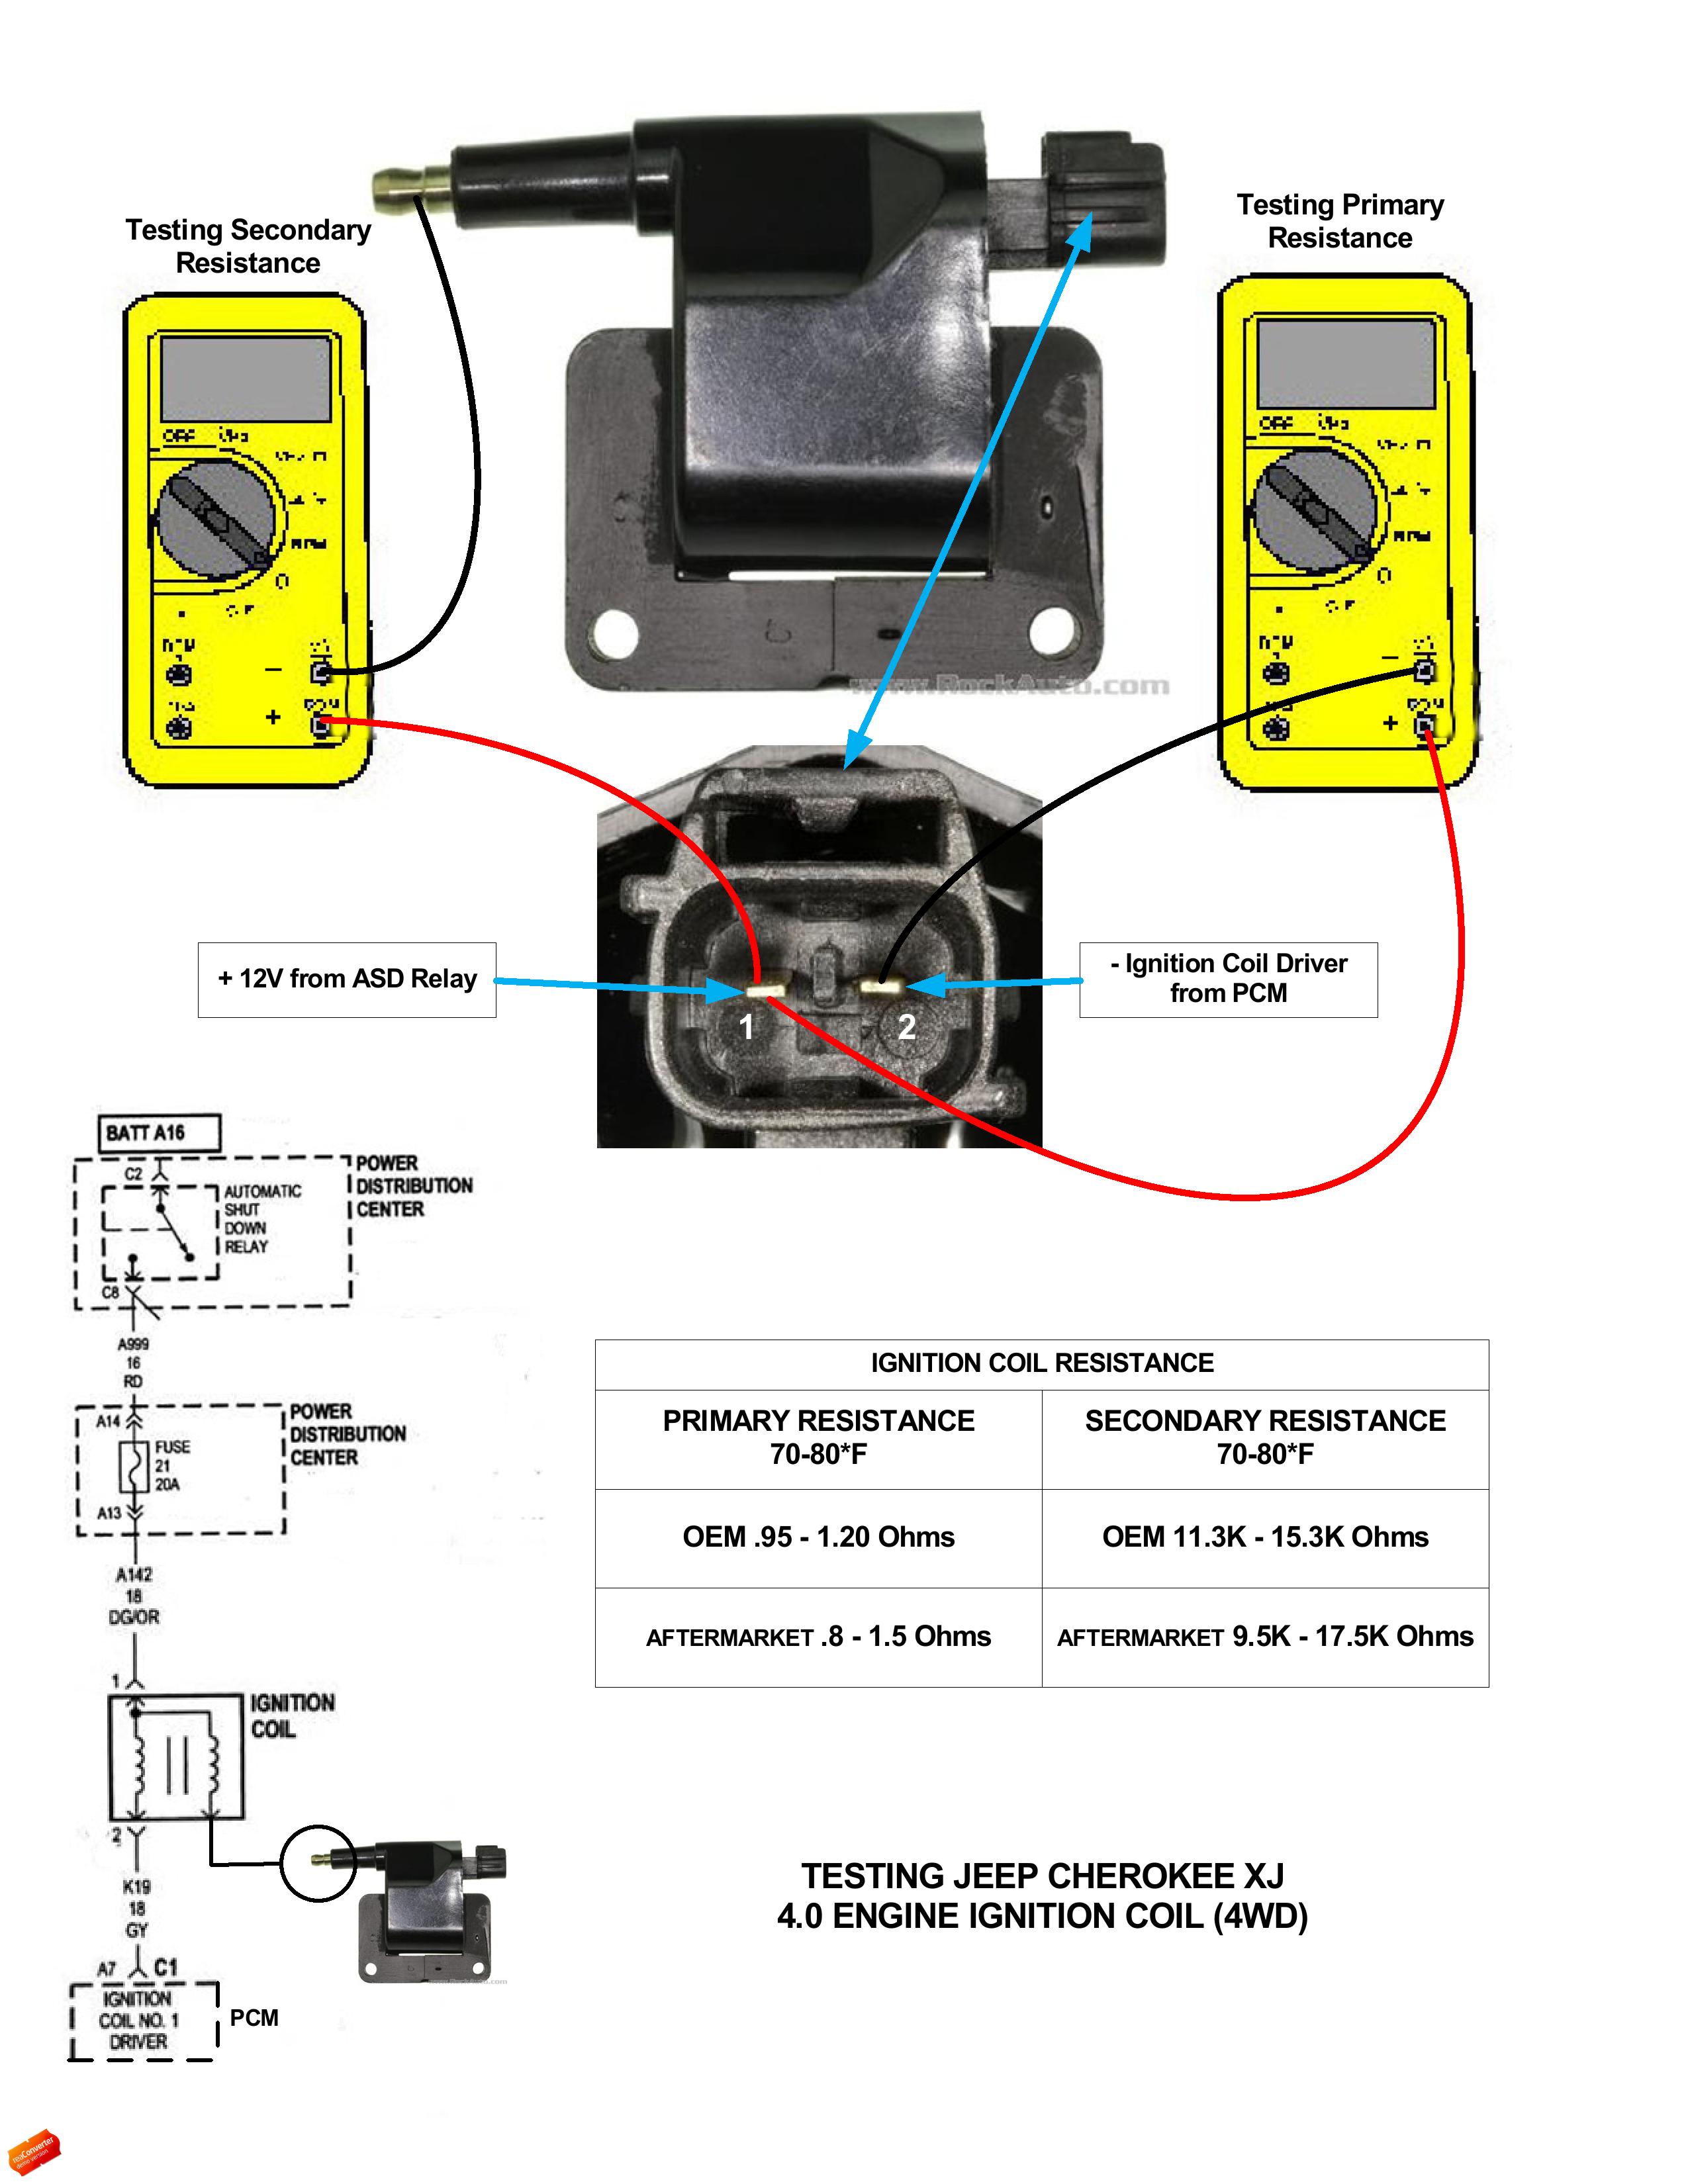 Ignition Coil Testing Procedure - Jeep Cherokee Forum